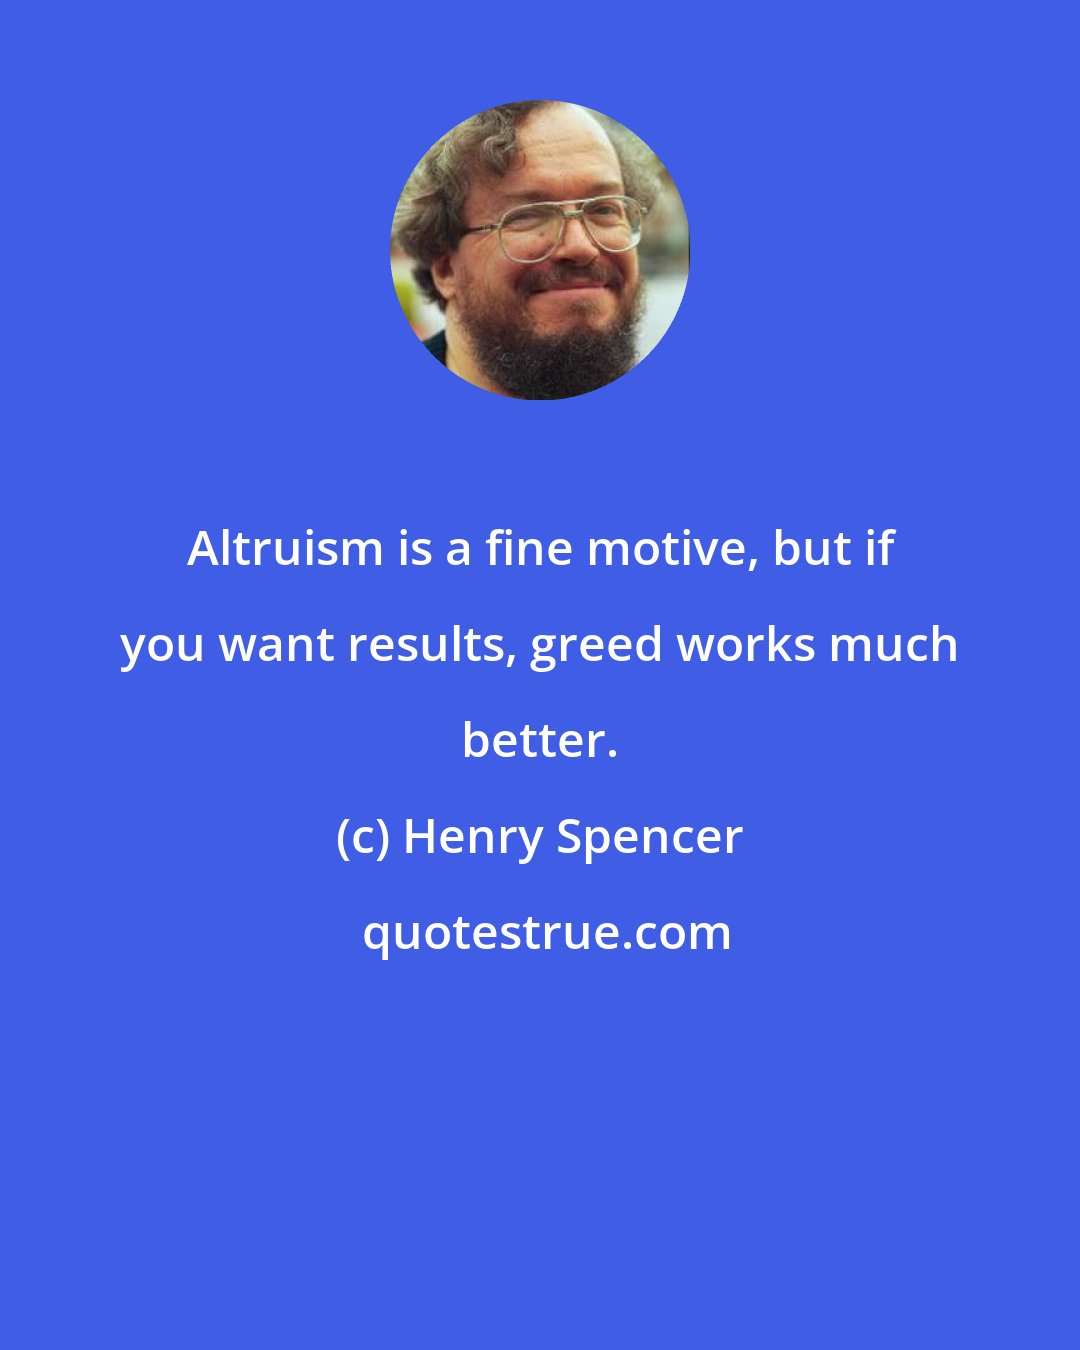 Henry Spencer: Altruism is a fine motive, but if you want results, greed works much better.